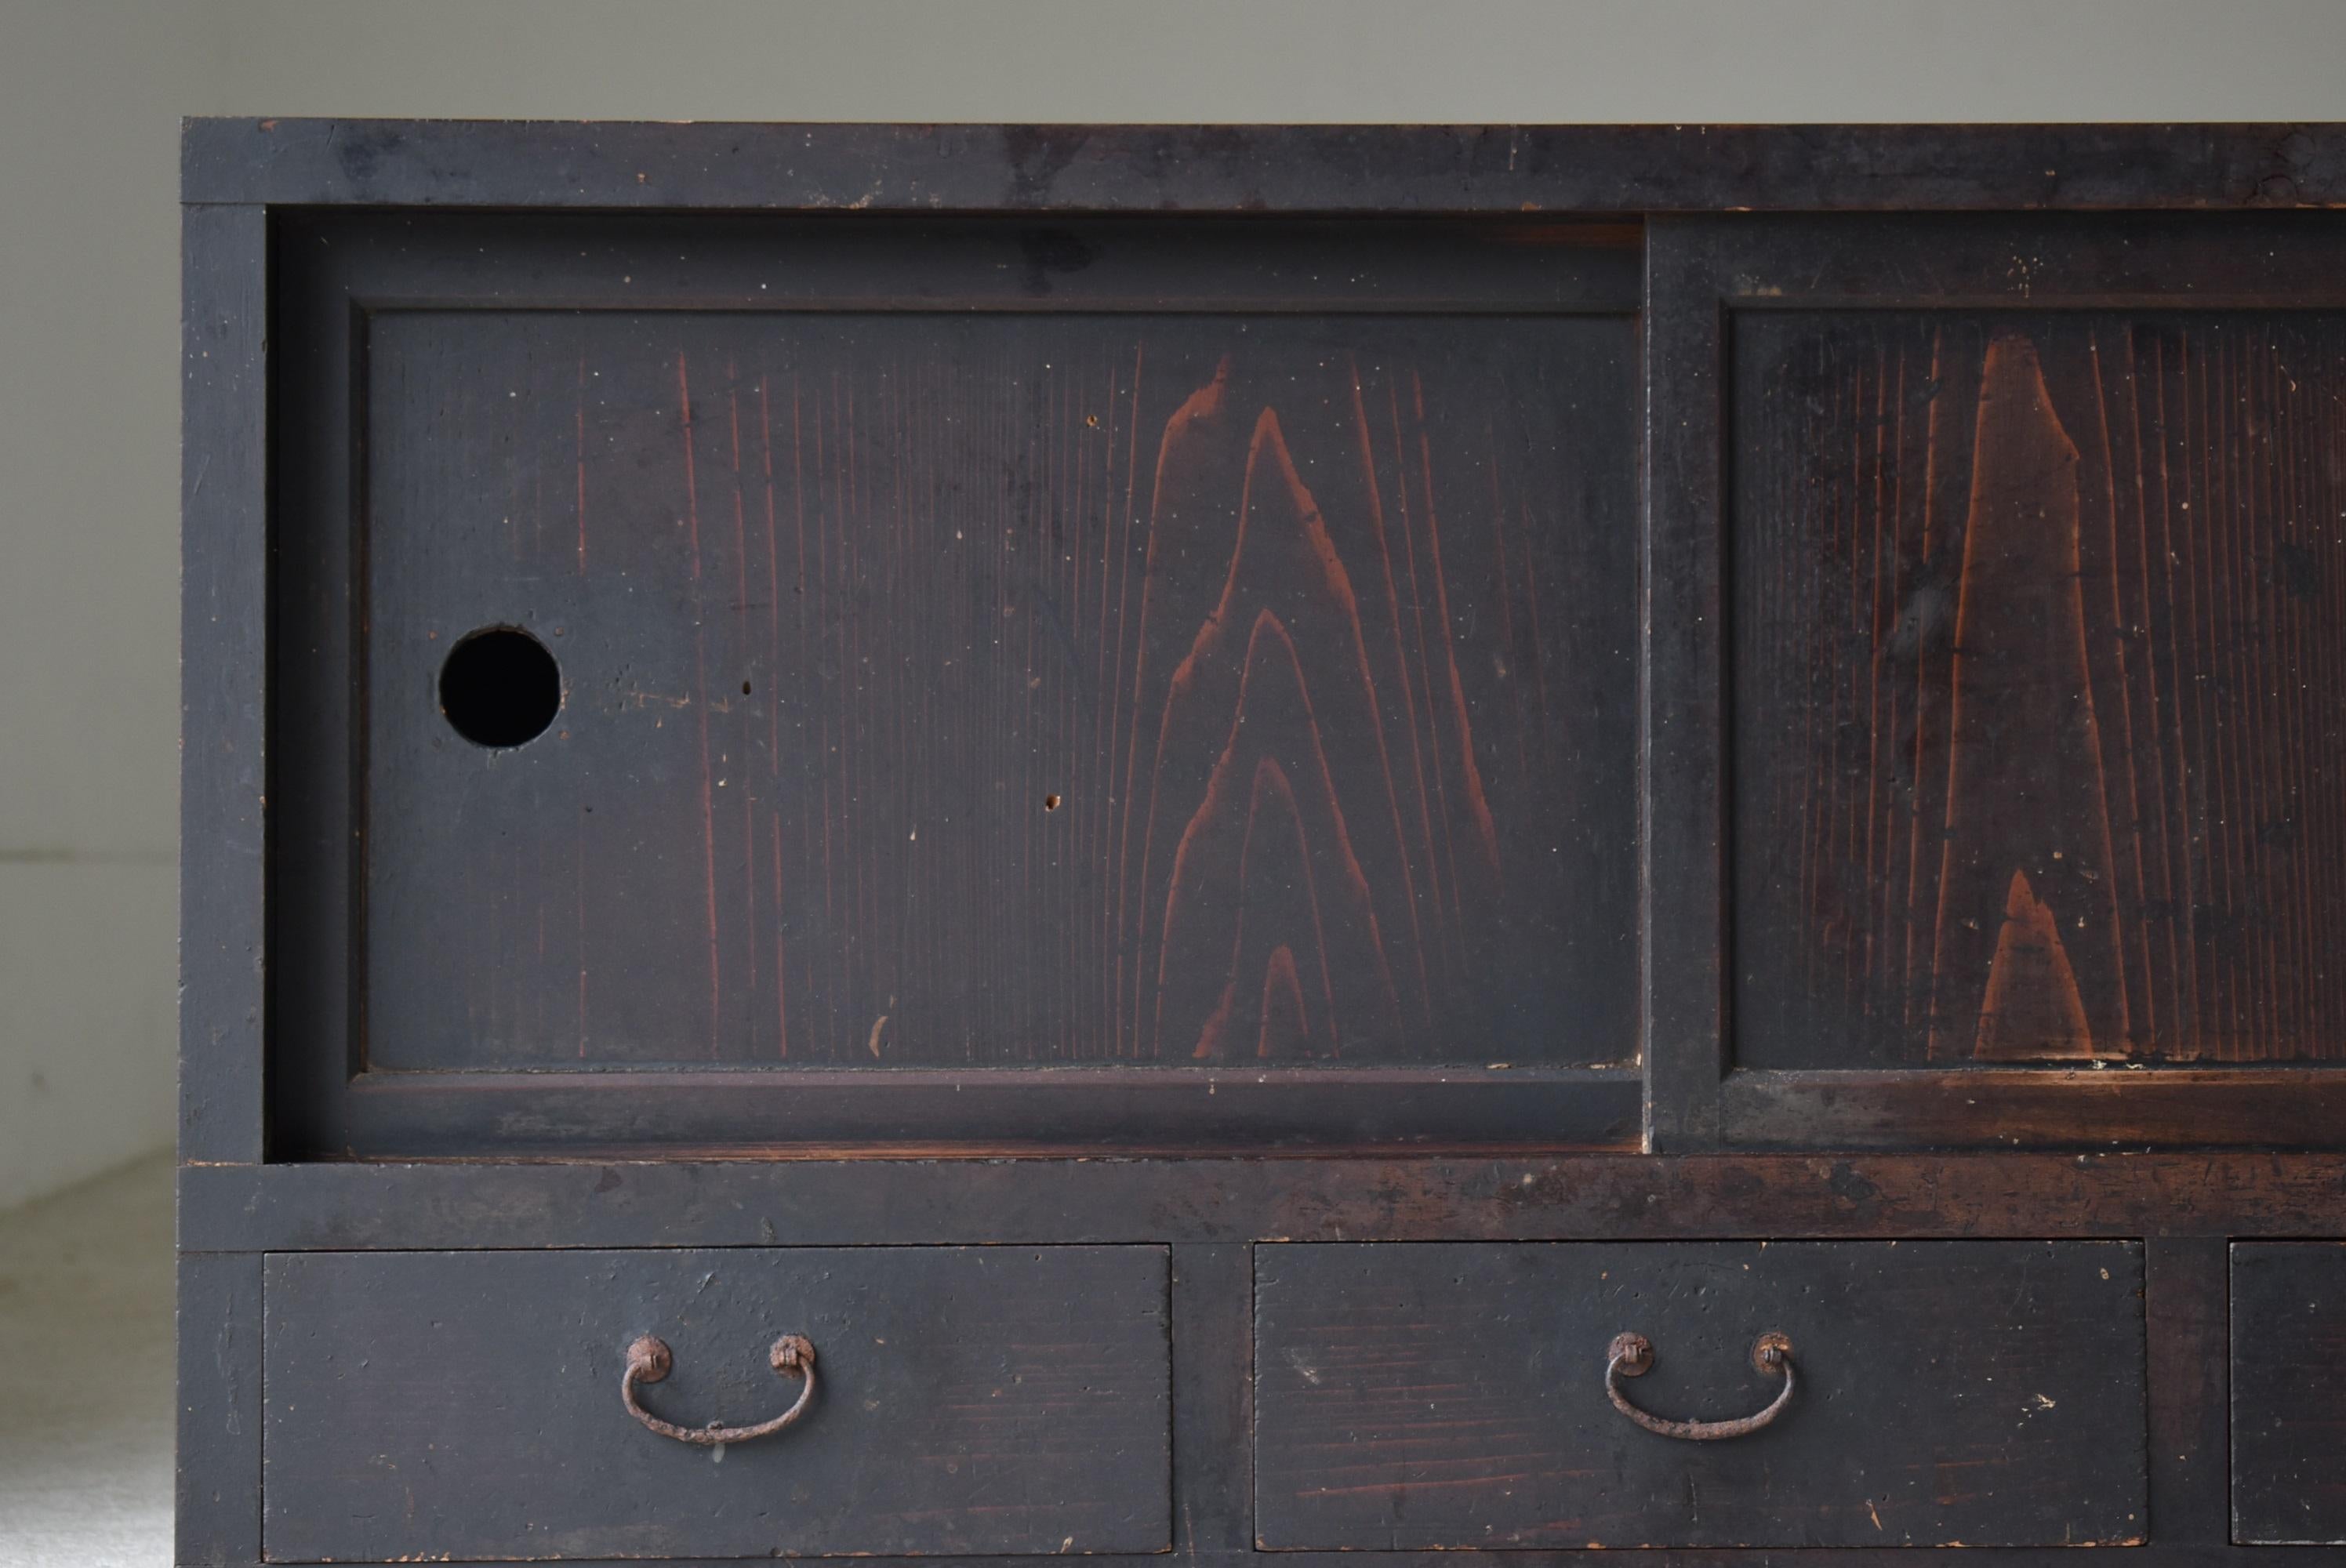 It is a black chest from Japan.
Made of cedar tree.
Furniture from the Edo period to the Meiji period. (1800s-1900s)

There is no useless decoration, it is simple and cool.
The black taste is beautiful.

The doors and drawers move smoothly